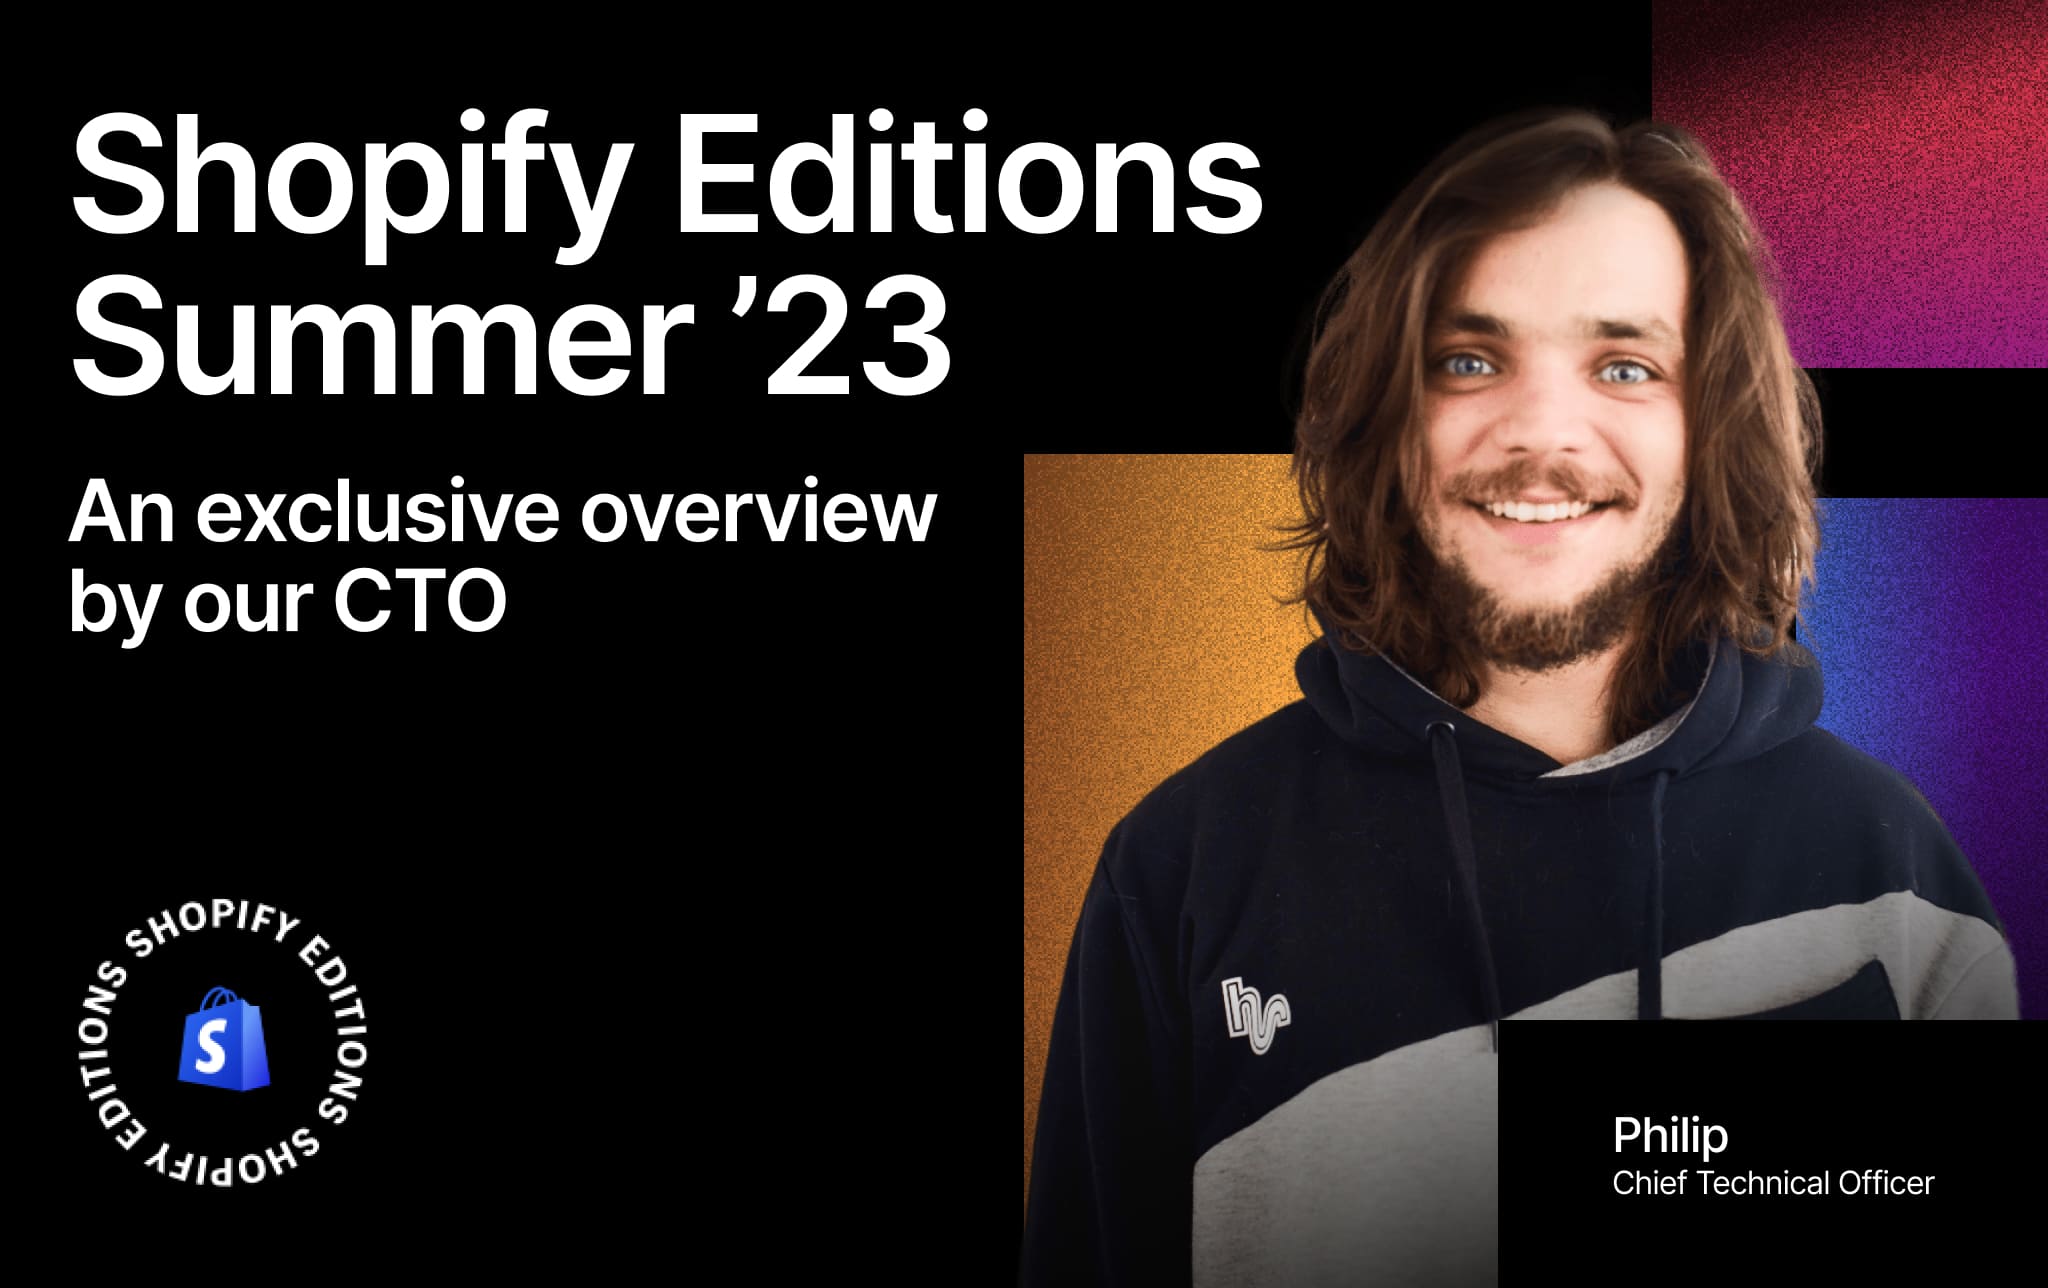 Shopify Editions Summer ’23: an exclusive overview by our CTO